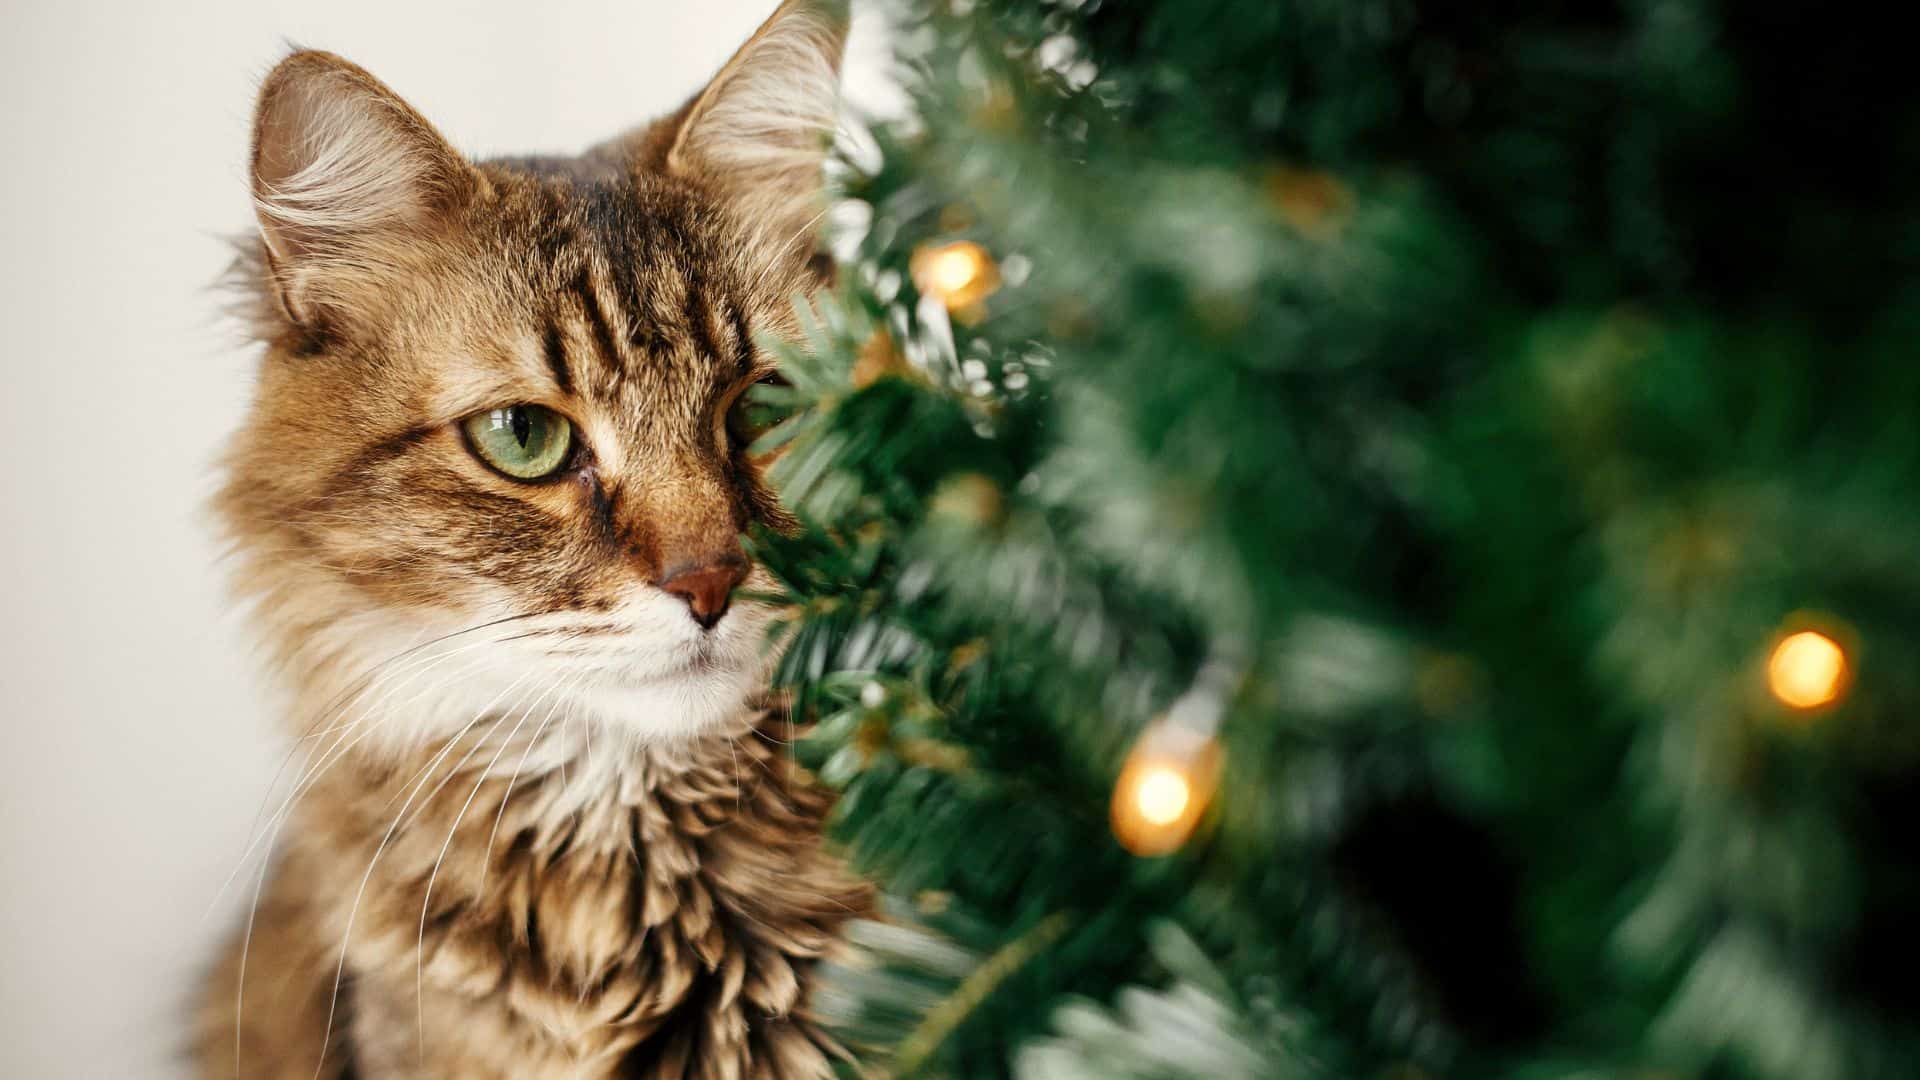 the cat by the Christmas tree